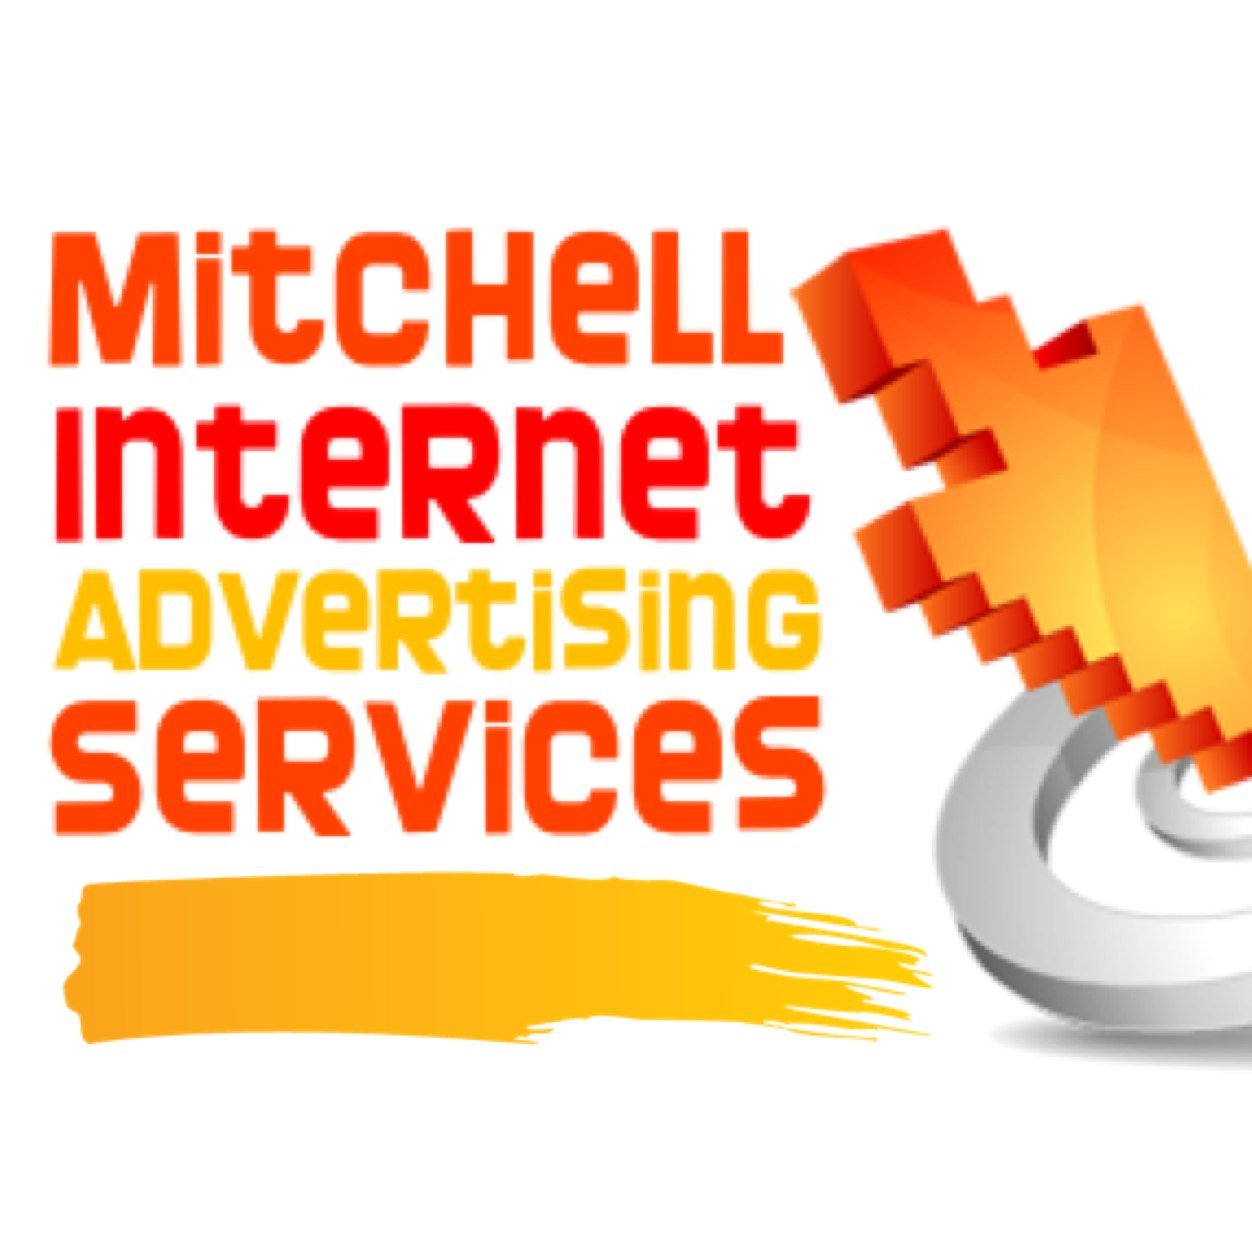 Mitchell Internet Advertising Services will promote your business via social media.